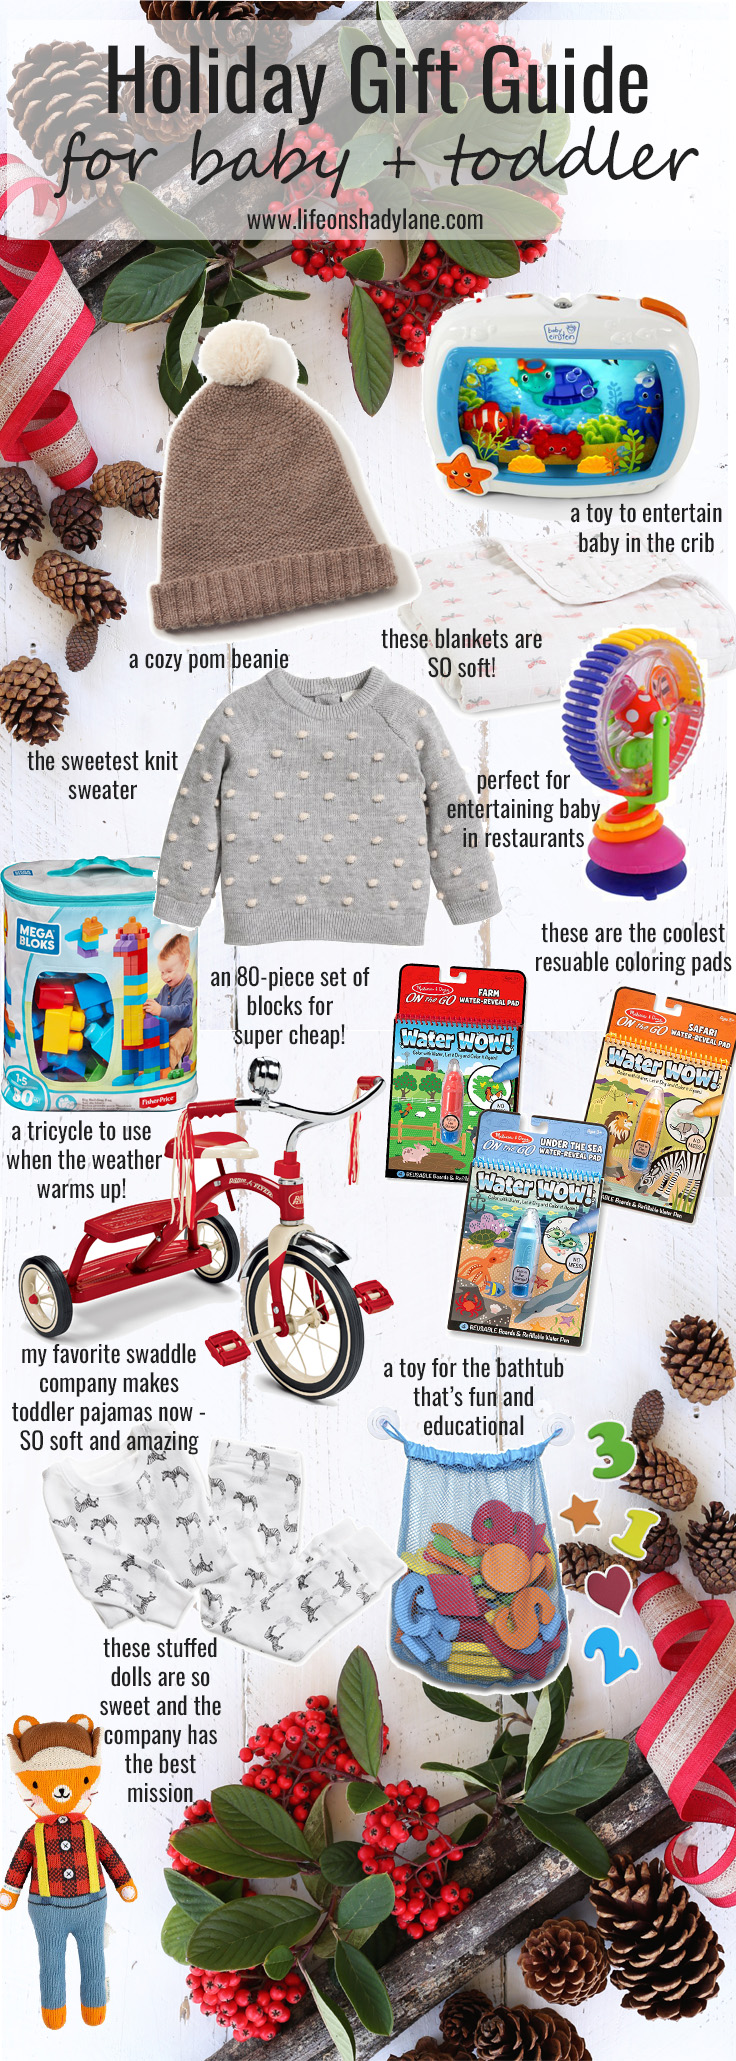 The ultimate Christmas gift guide for baby and toddler